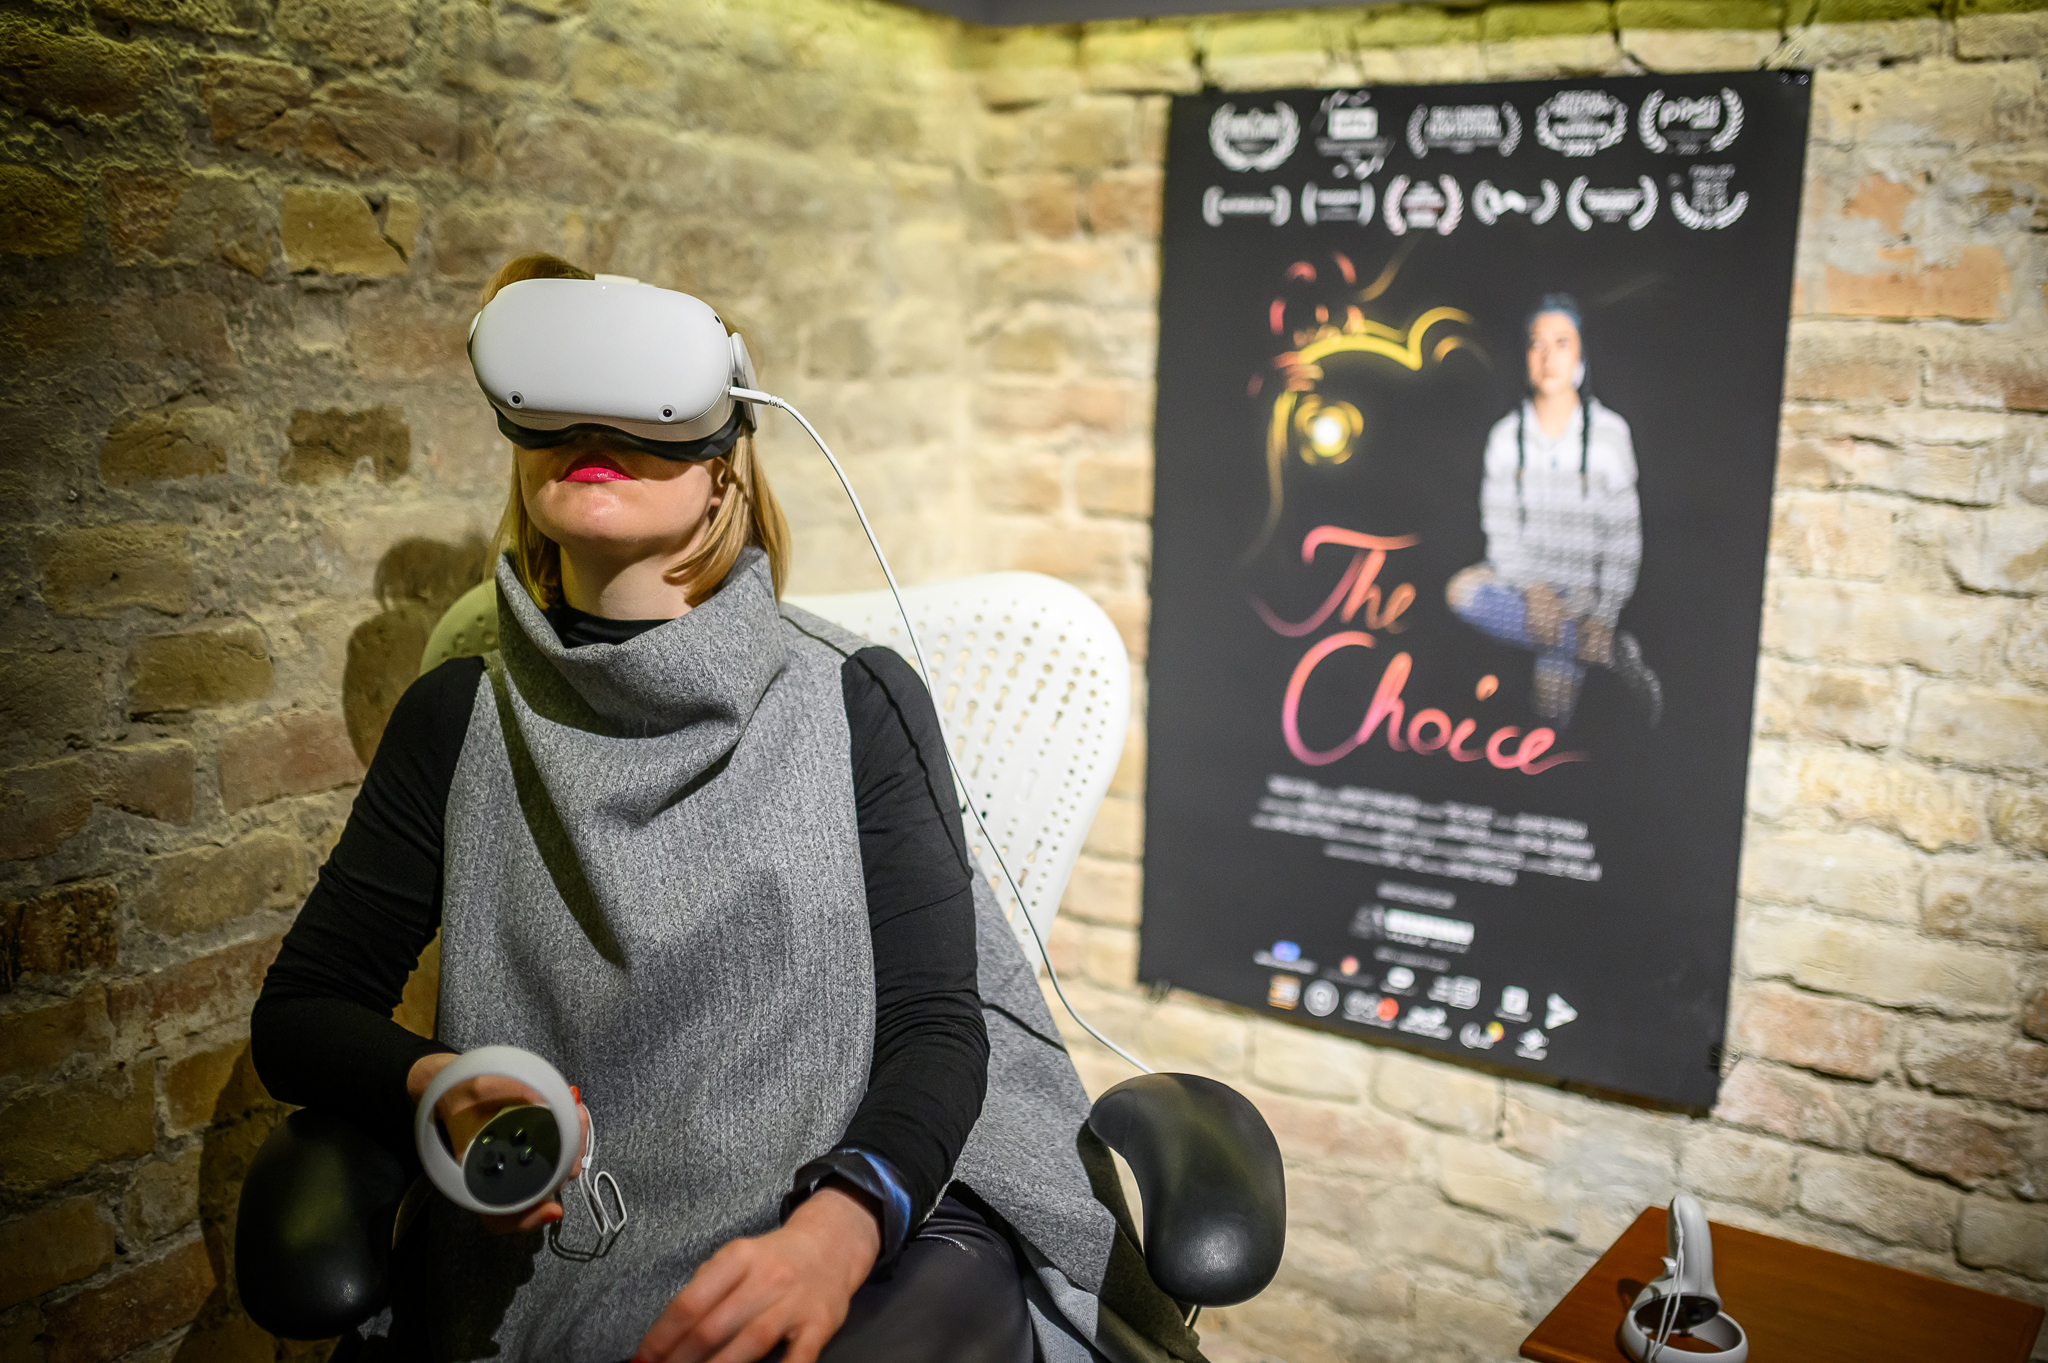 woman watching the Choice, a VR film